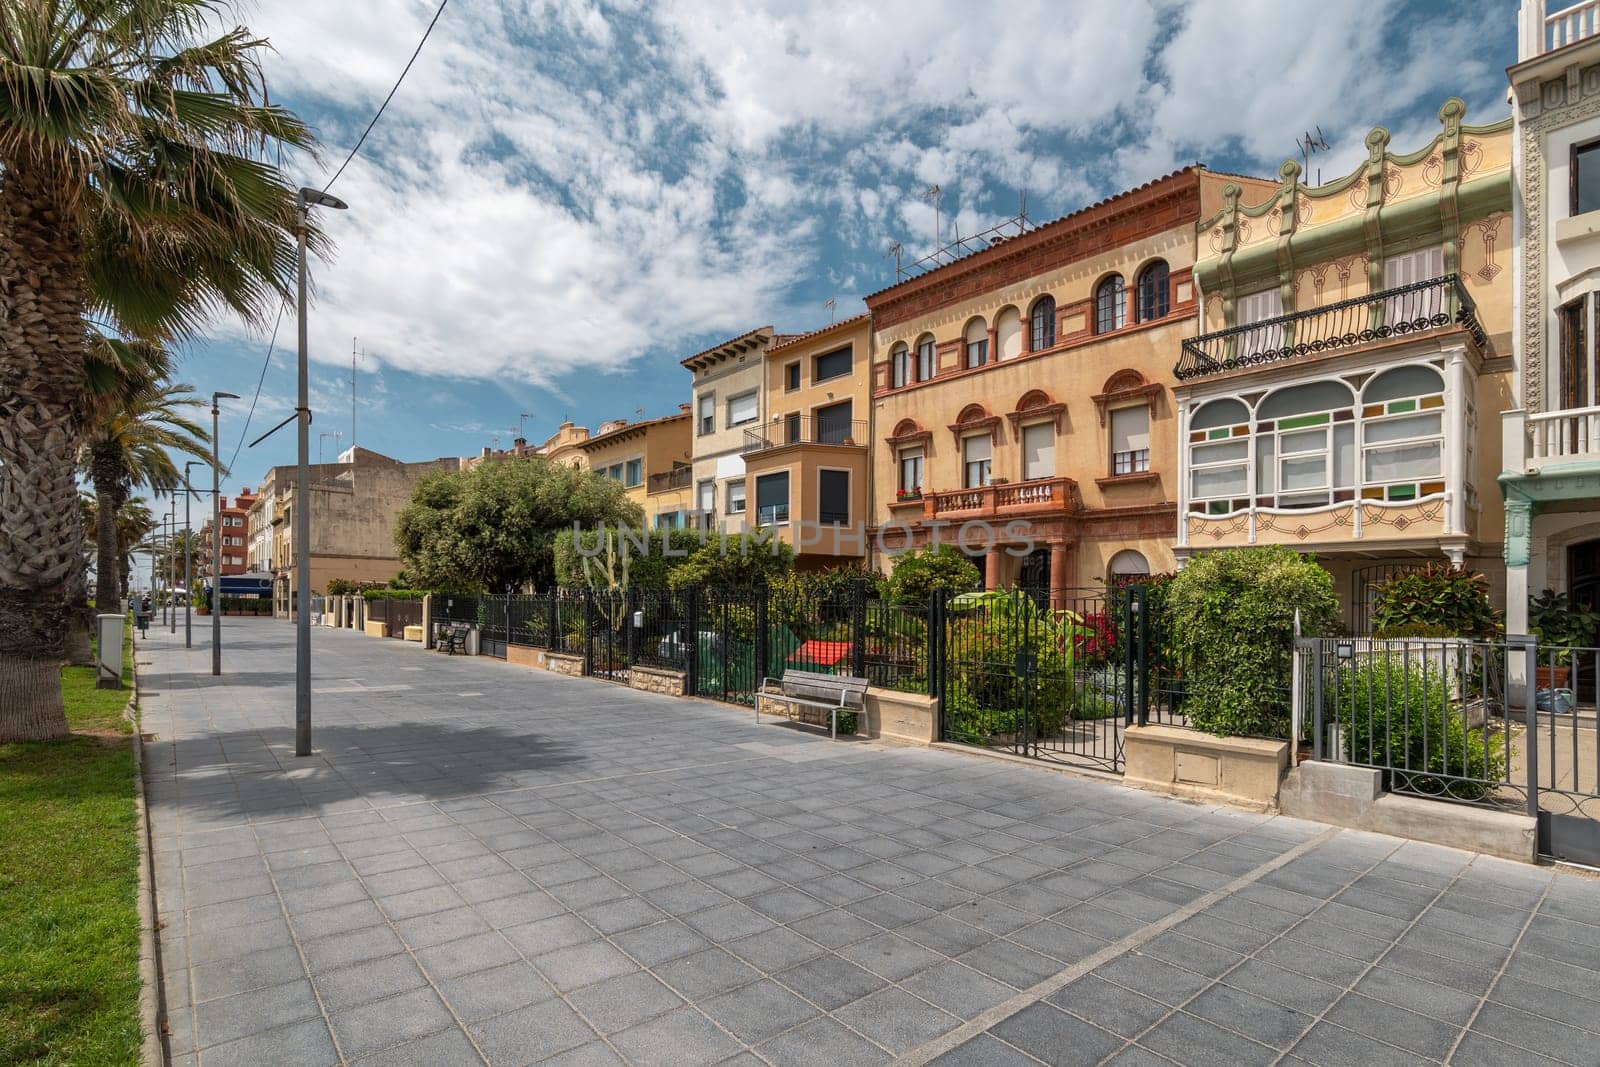 Ancient architectural style of buildings in Vilassar de Mar city. Vintage residential houses for rent at popular Catalonian resort. Spain beauty